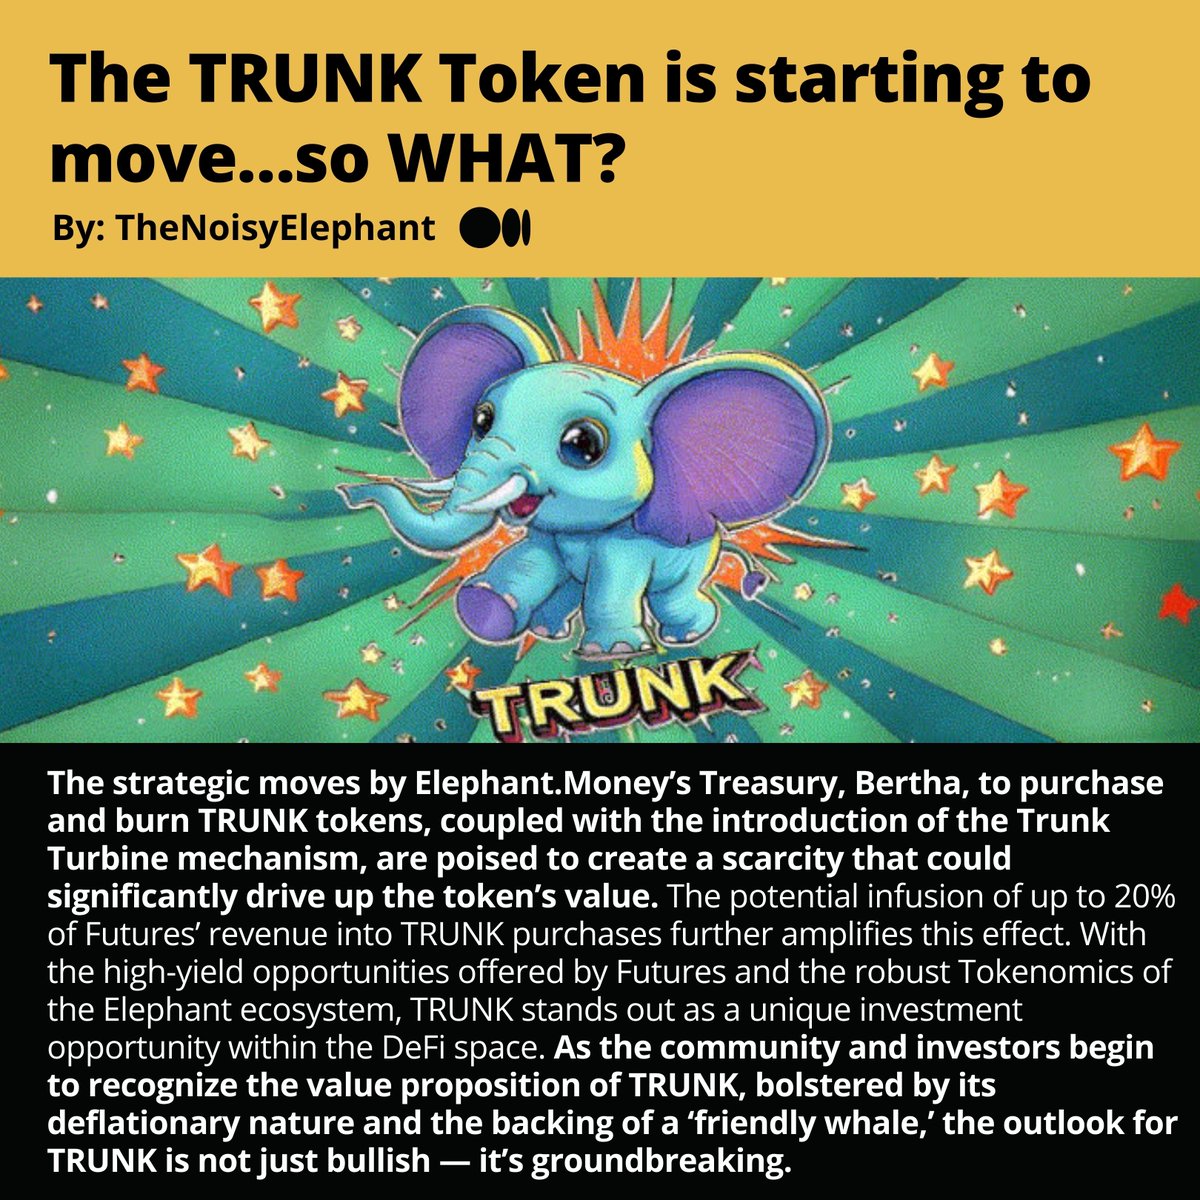 Since the pivot of $TRUNK to a cross-chain deflationary memecoin it’s done a 5x while dropping a zero 👀 cryptozoa.com/the-trunk-toke… #crypto #trunk #sol #memecoin #bsc